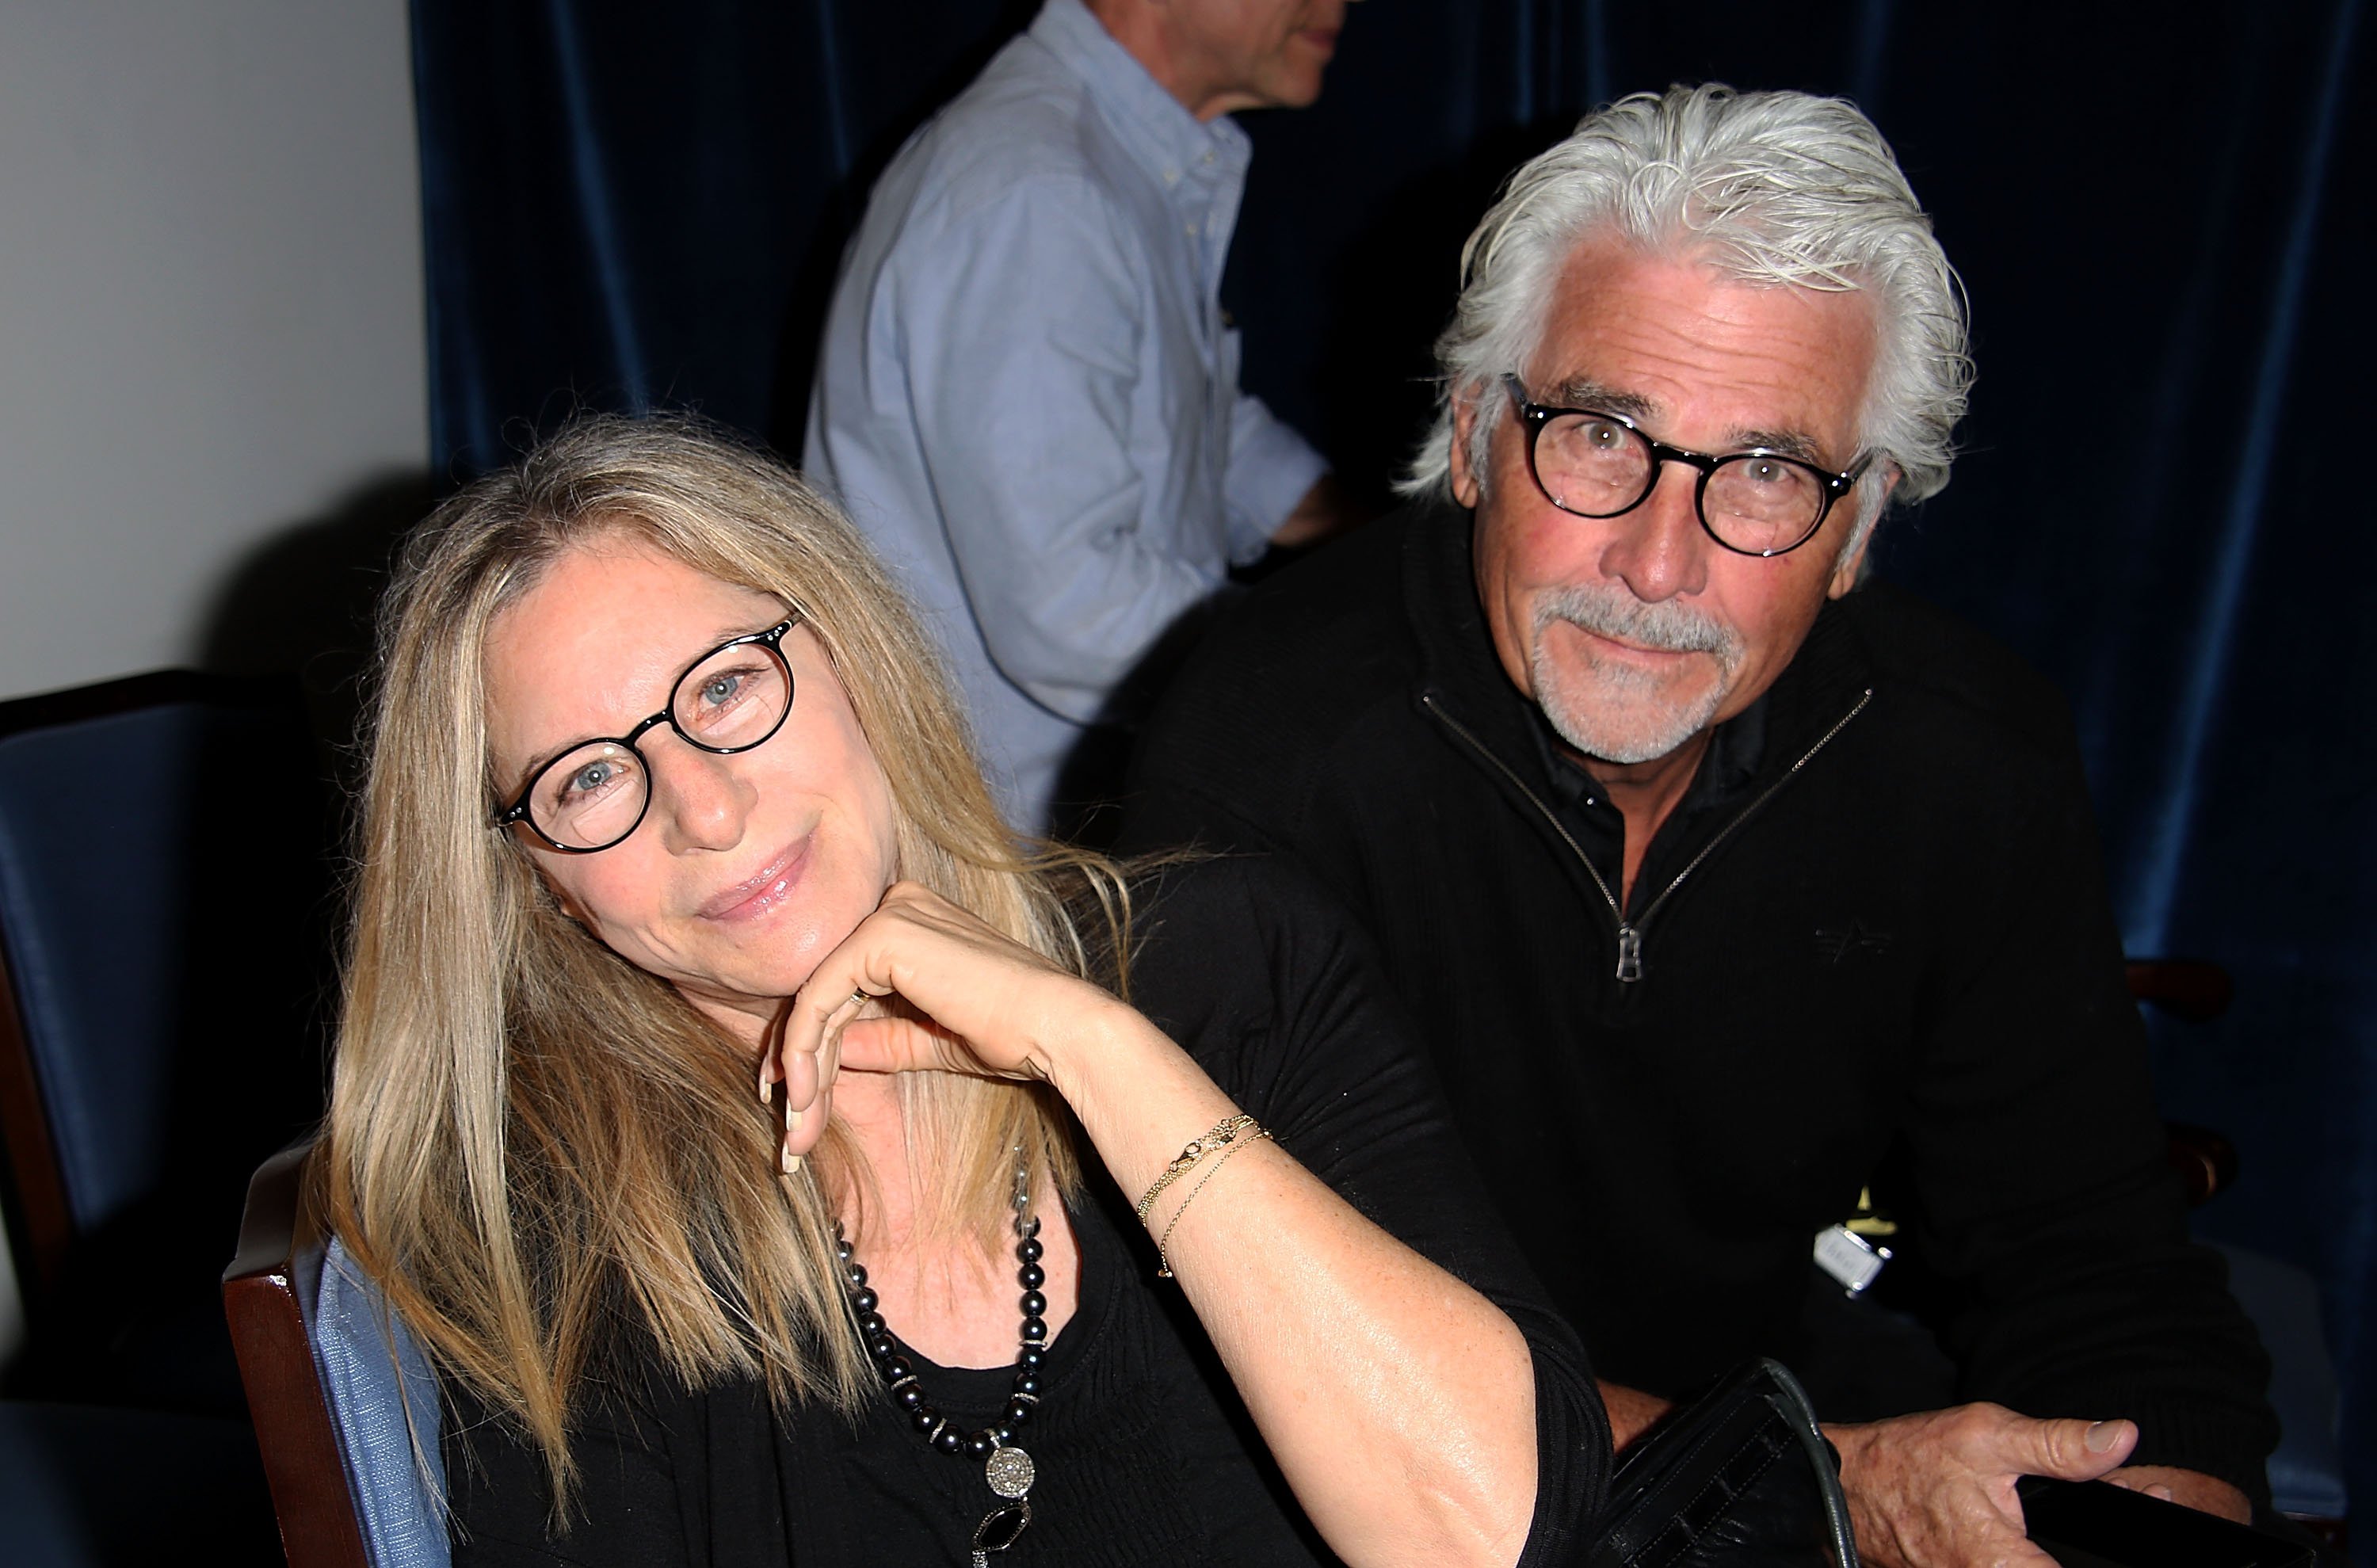 Barbra Streisand and James Brolin attend the "And So It Goes" premiere on July 6, 2014 | Photo: GettyImages